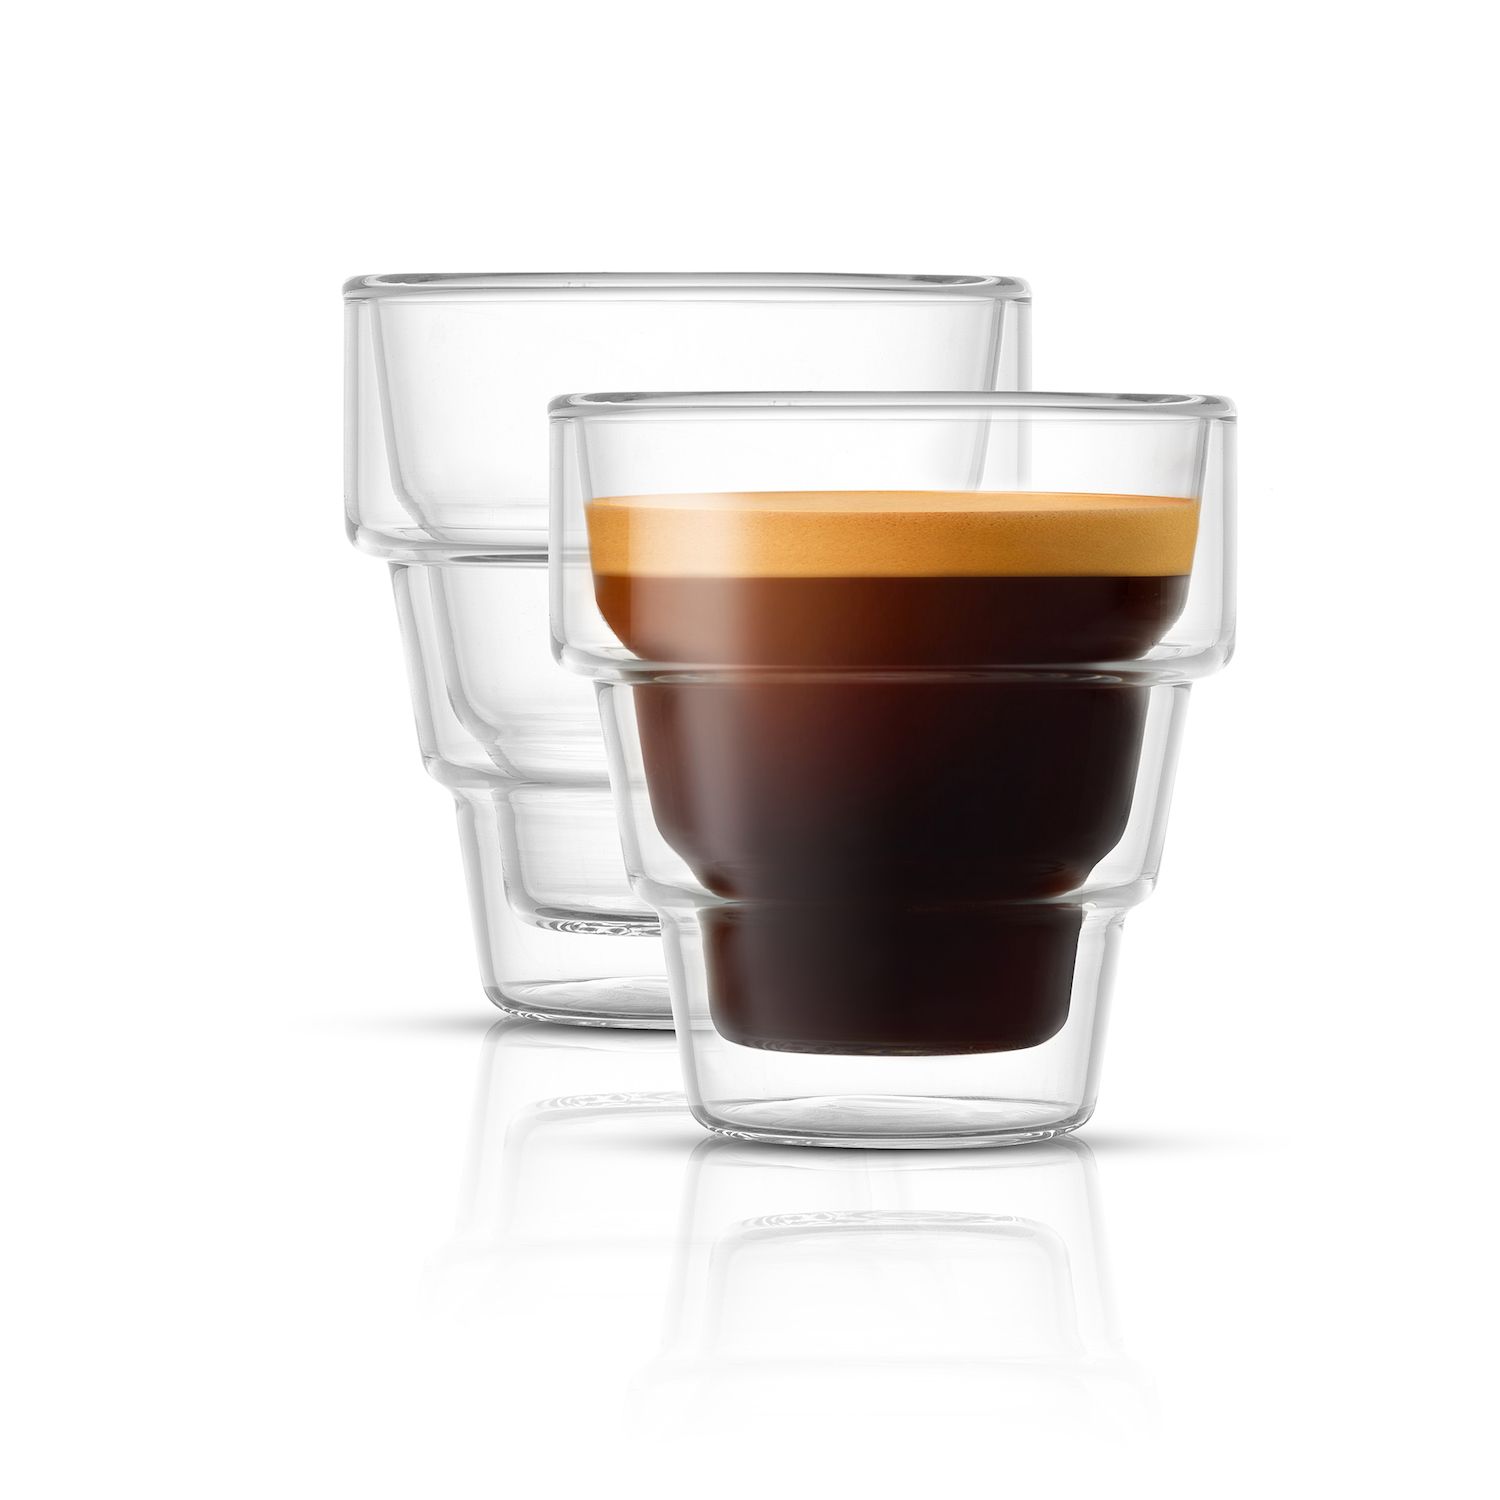 Espresso Cups Set of 2, Double Walled Espresso Shot Glass with Spout, High  Boros